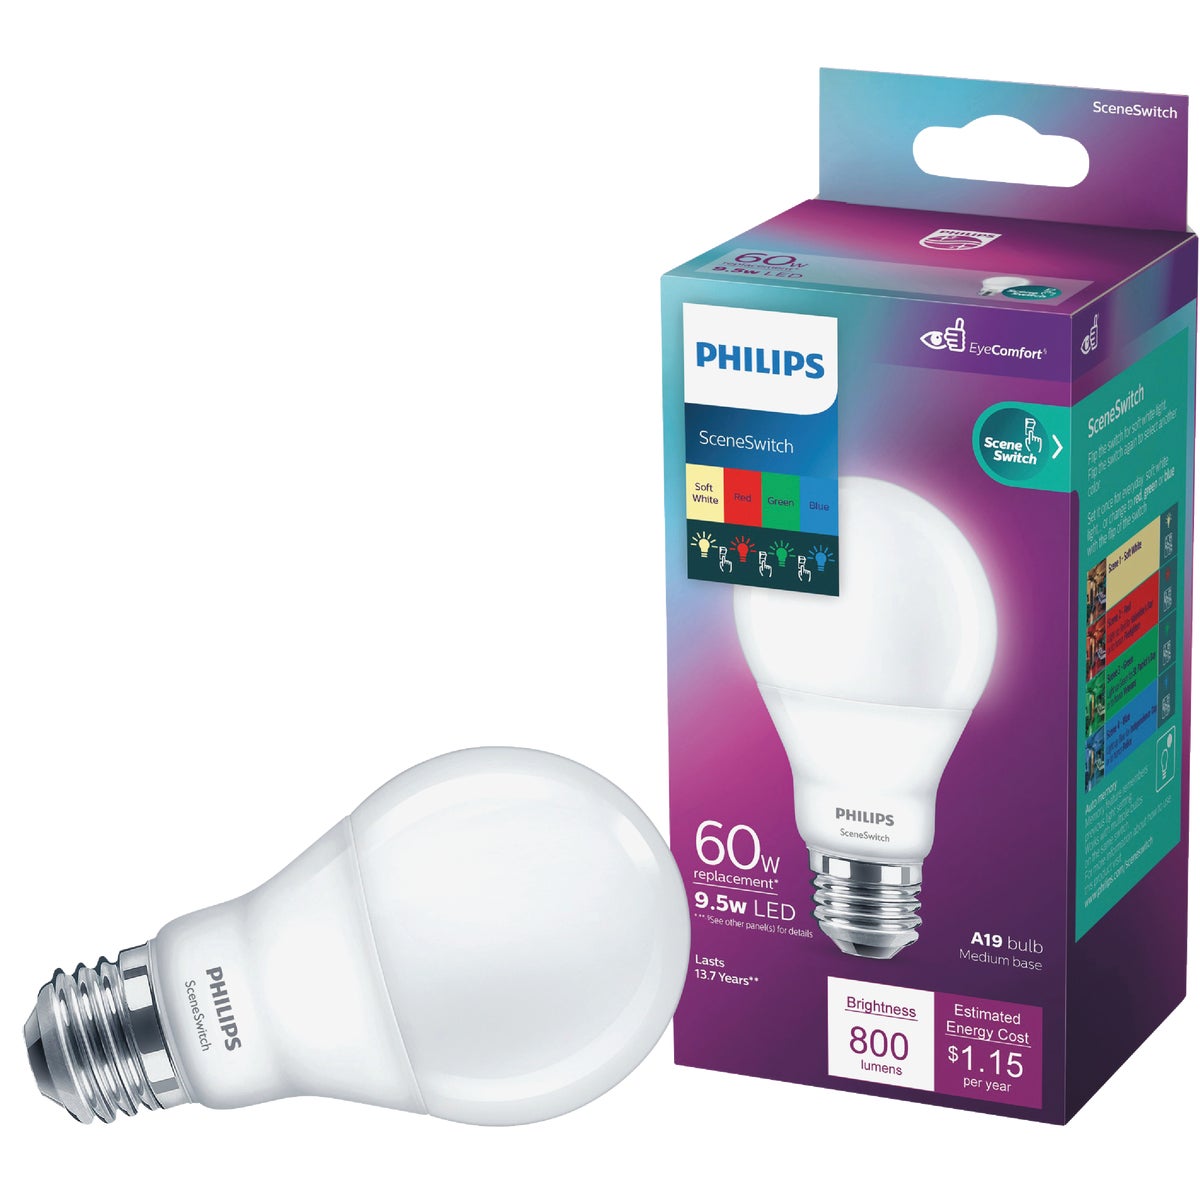 Philips SceneSwitch Indoor/Outdoor 60W Equivalent Soft White A19 Medium LED Light Bulb